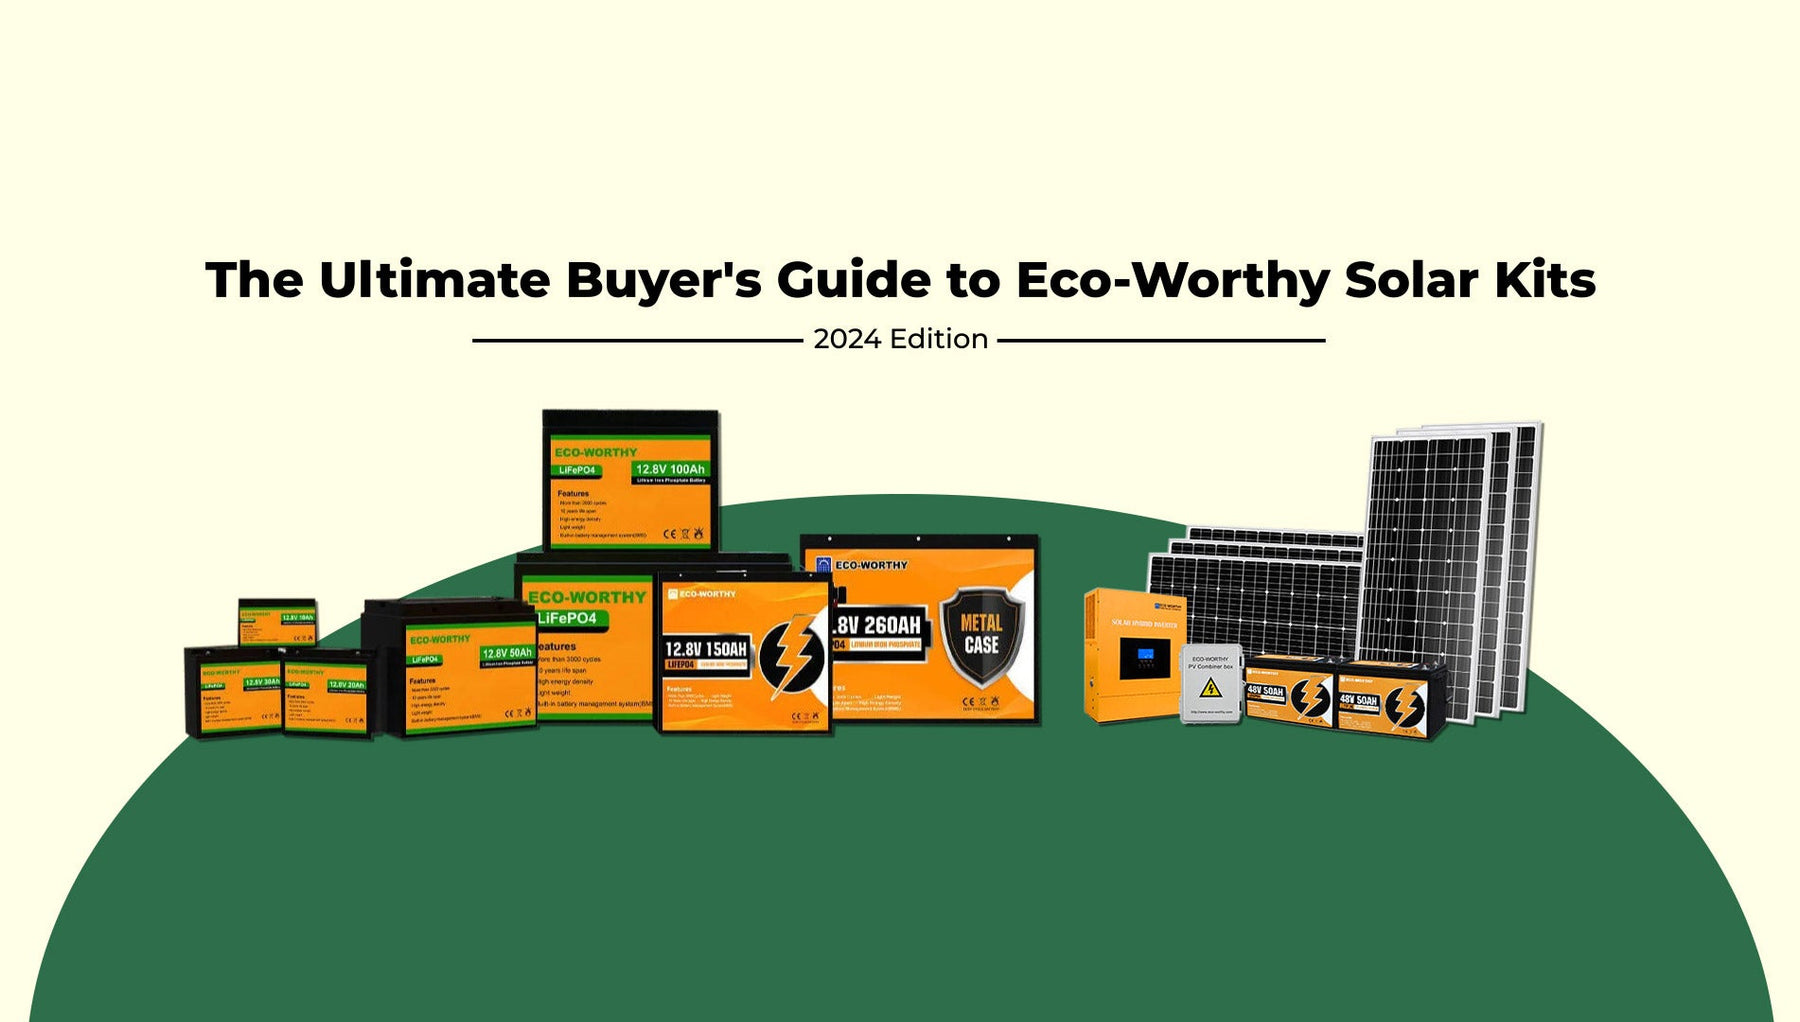 The Ultimate Buyer's Guide to Eco-Worthy Solar Kits